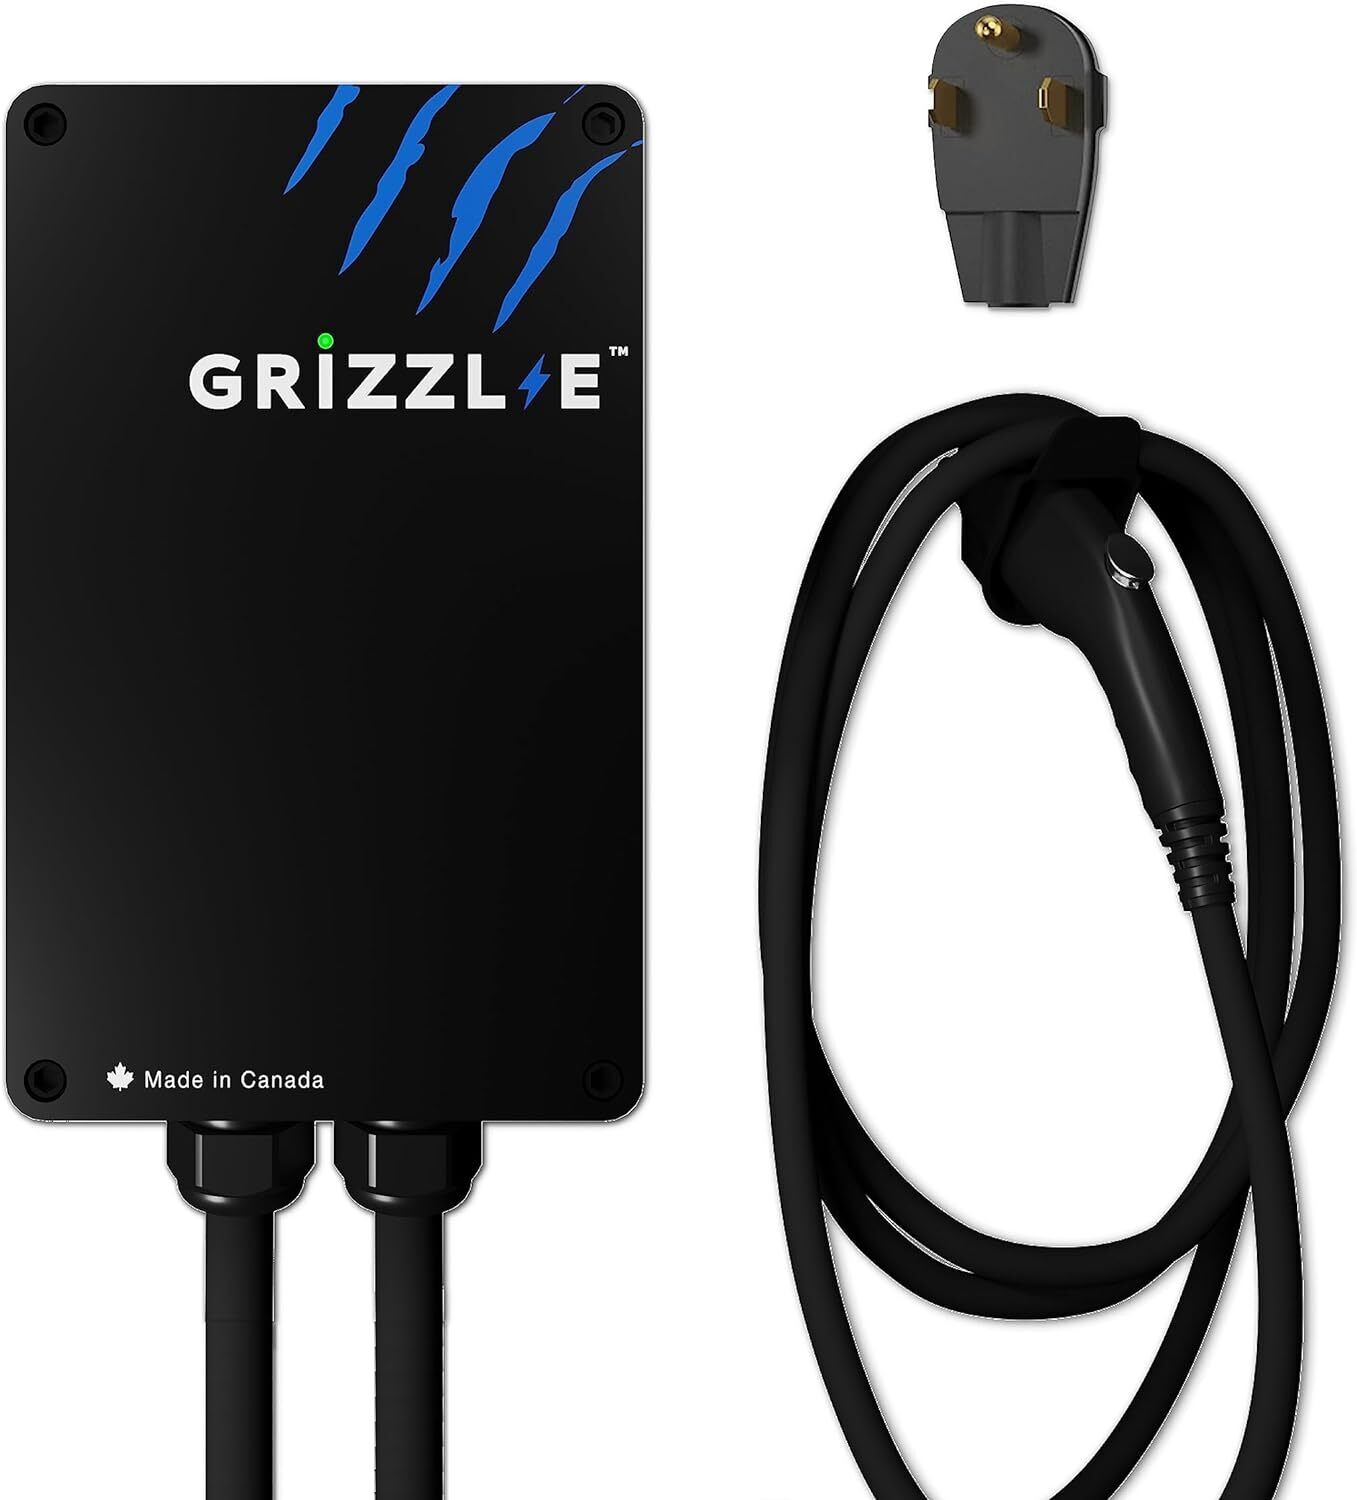 Grizzl-E Level 2 Electric Vehicle (EV) Charger up to 40 Amp UL Certified Outdoor